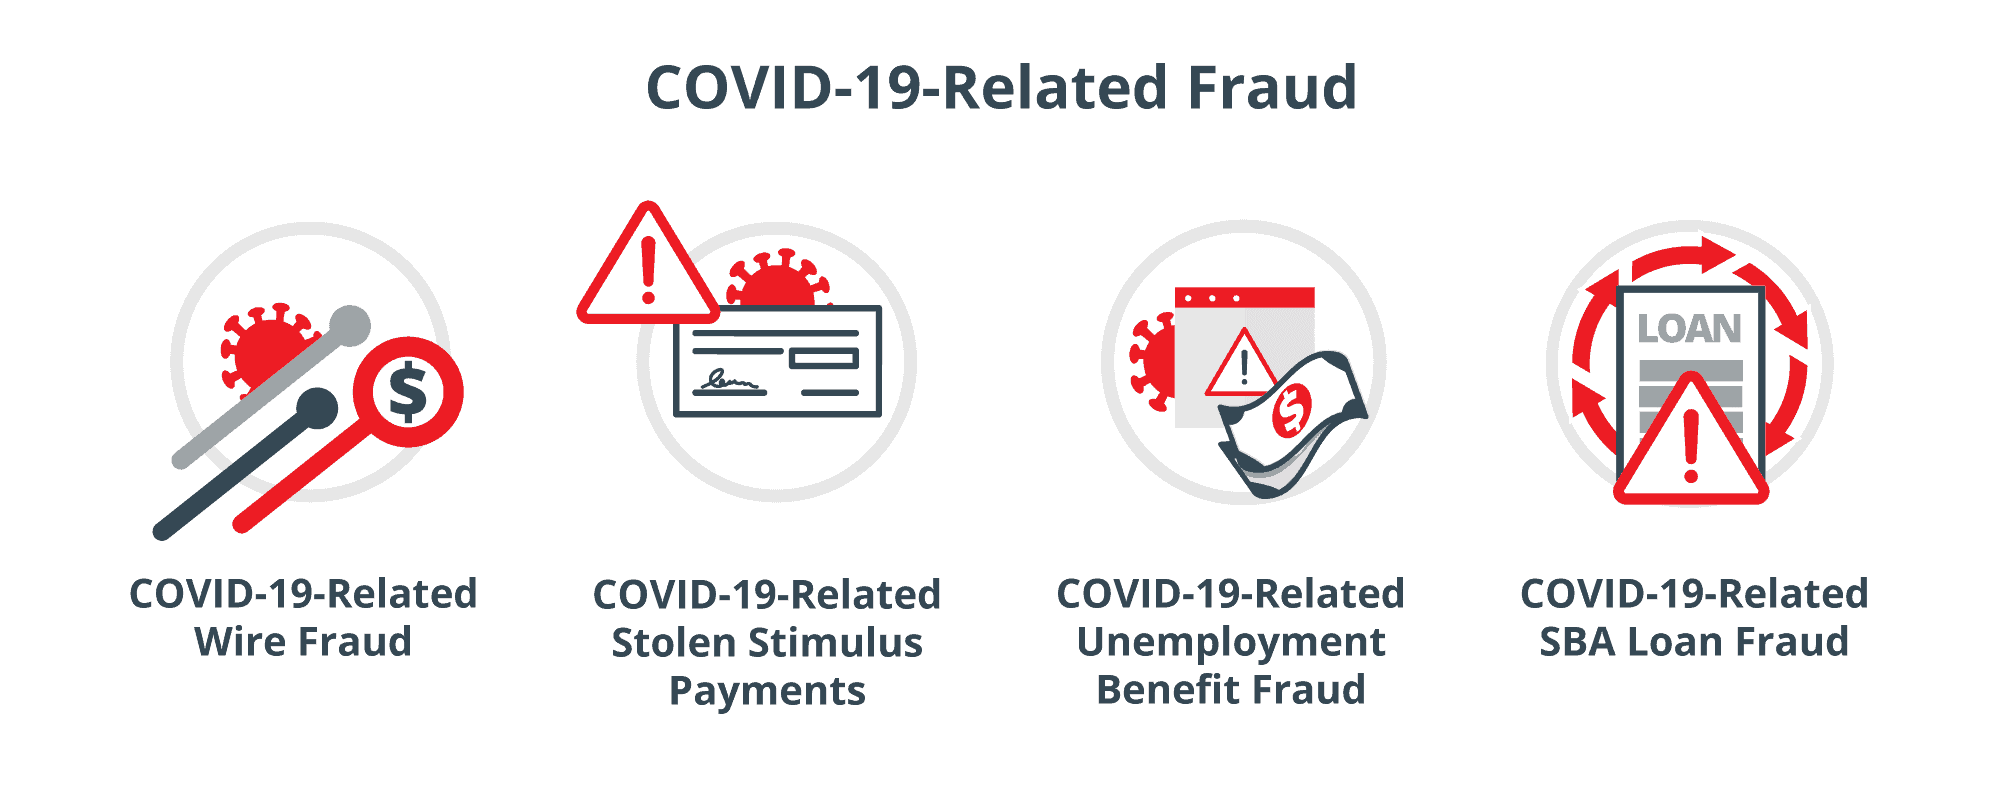 COVID-19-Related Fraud